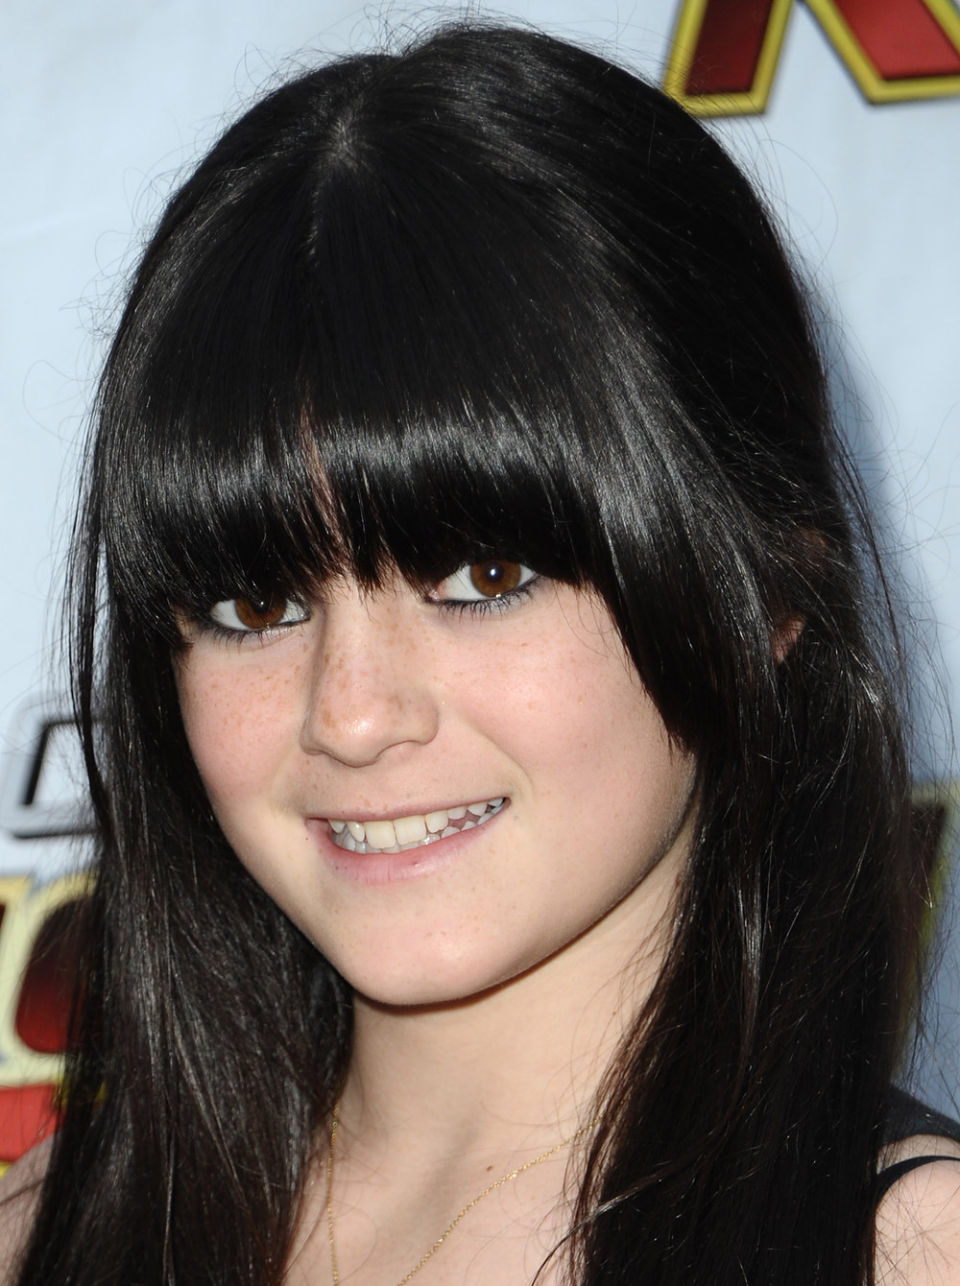 Kylie-Jenner-in-anul-2009